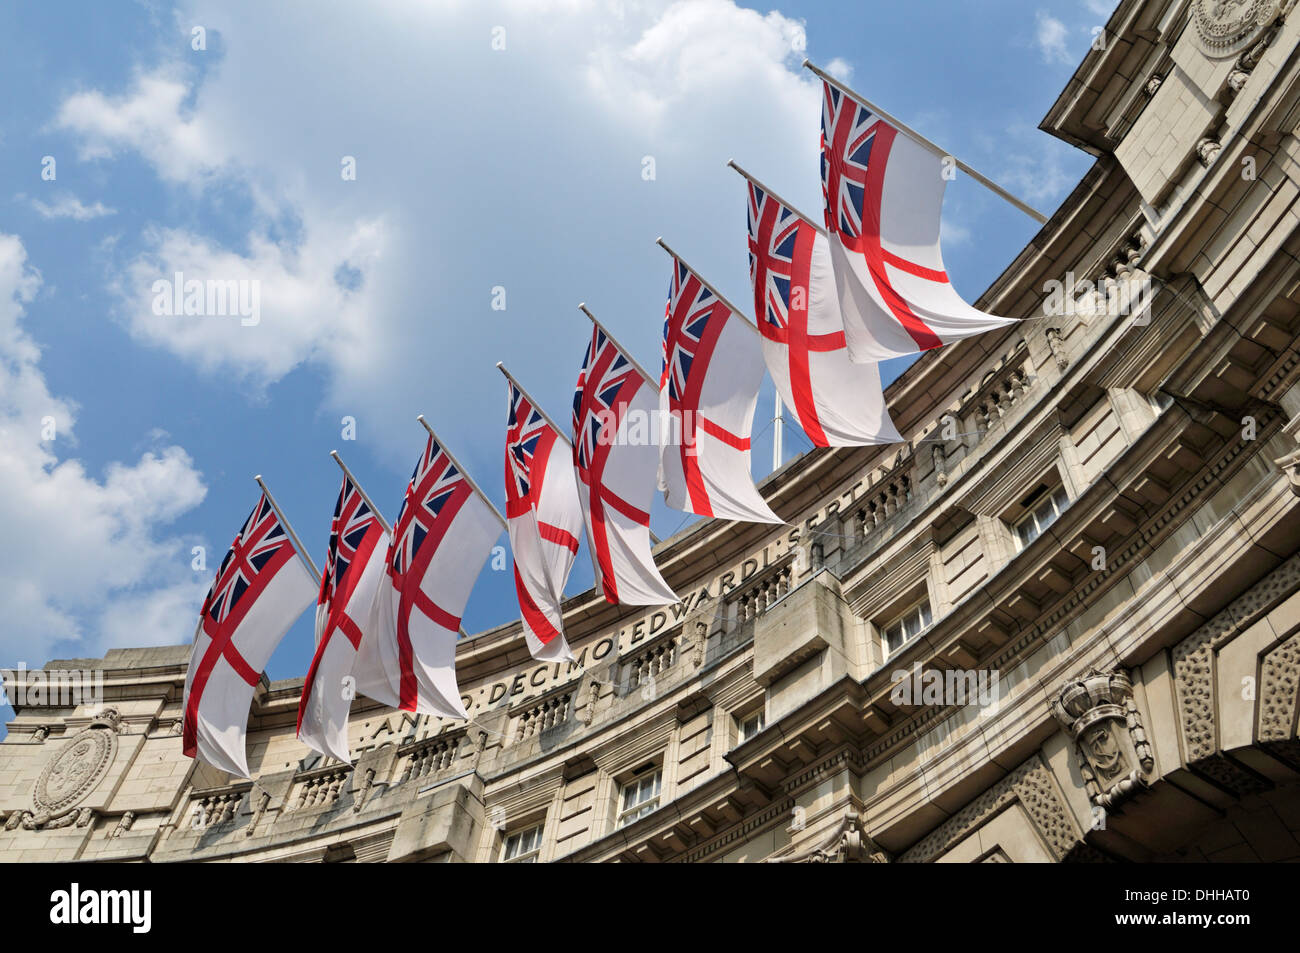 Flags and Ensigns over Admiralty Arch, The Mall, London SW1A, United Kingdom Stock Photo